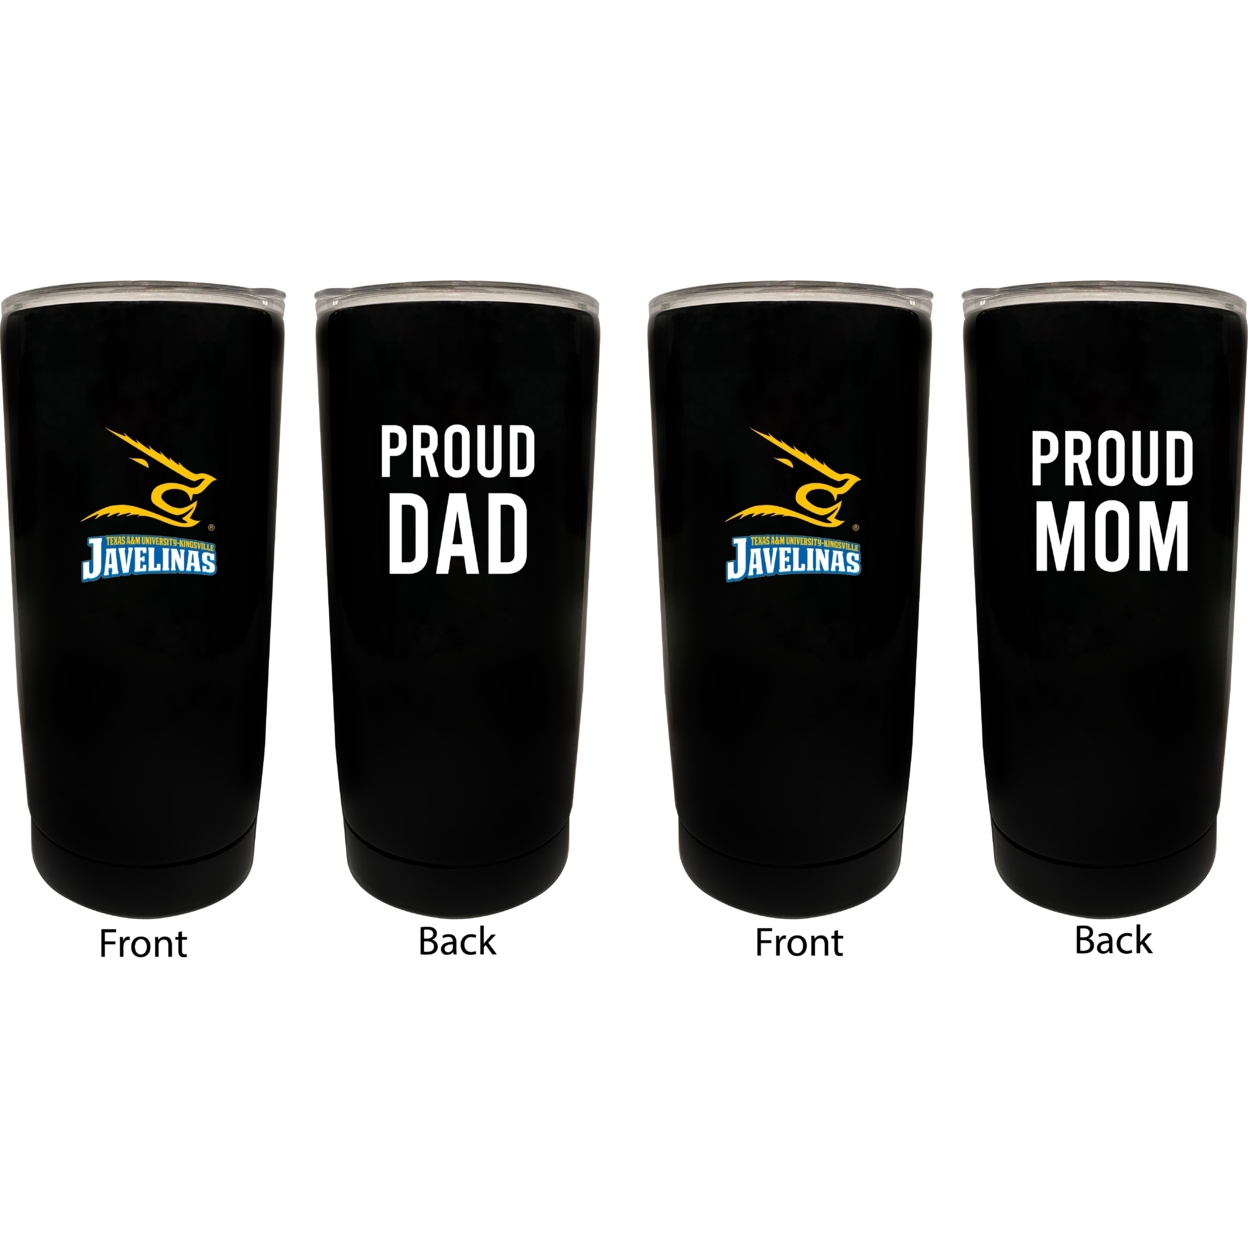 Texas A&M Kingsville Javelinas Proud Mom And Dad 16 Oz Insulated Stainless Steel Tumblers 2 Pack Black.